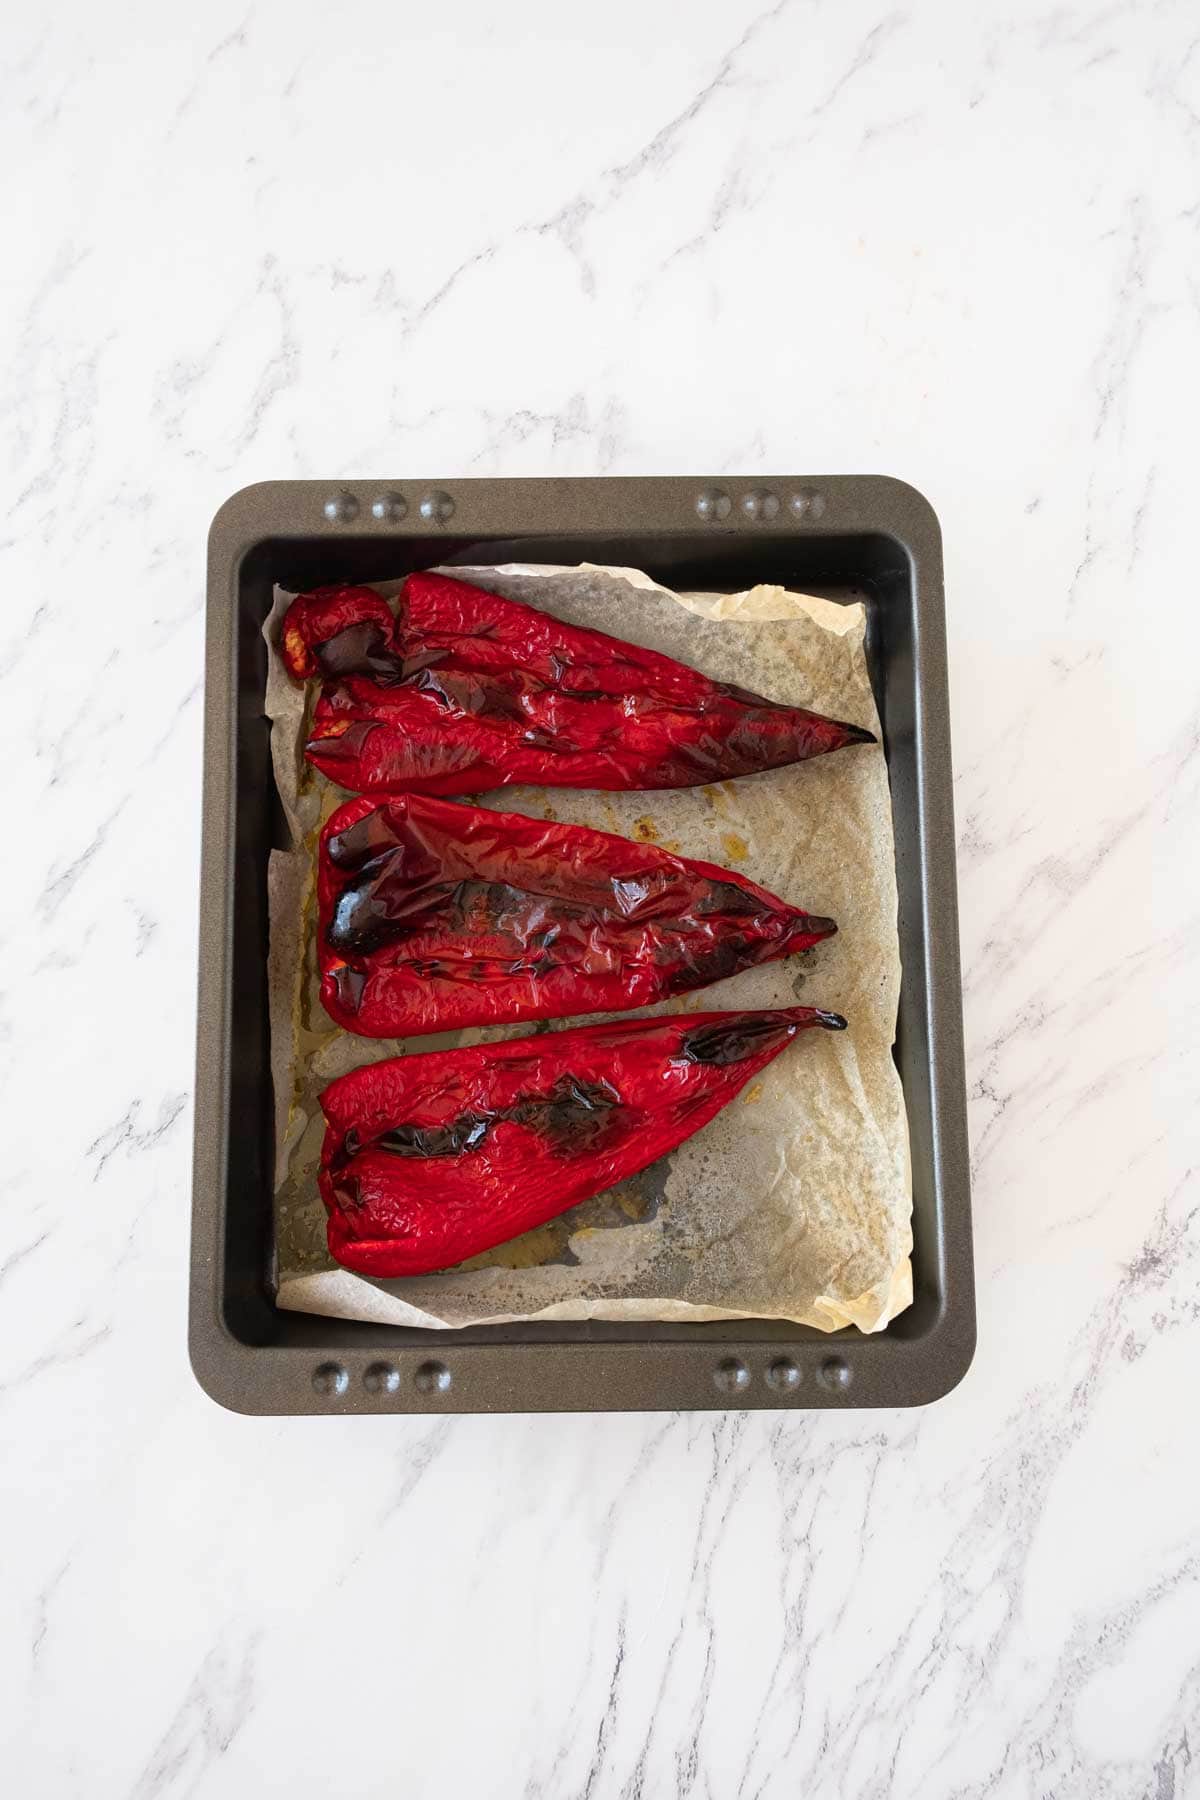 Roasted red peppers, slightly blackened in a roasting pan.